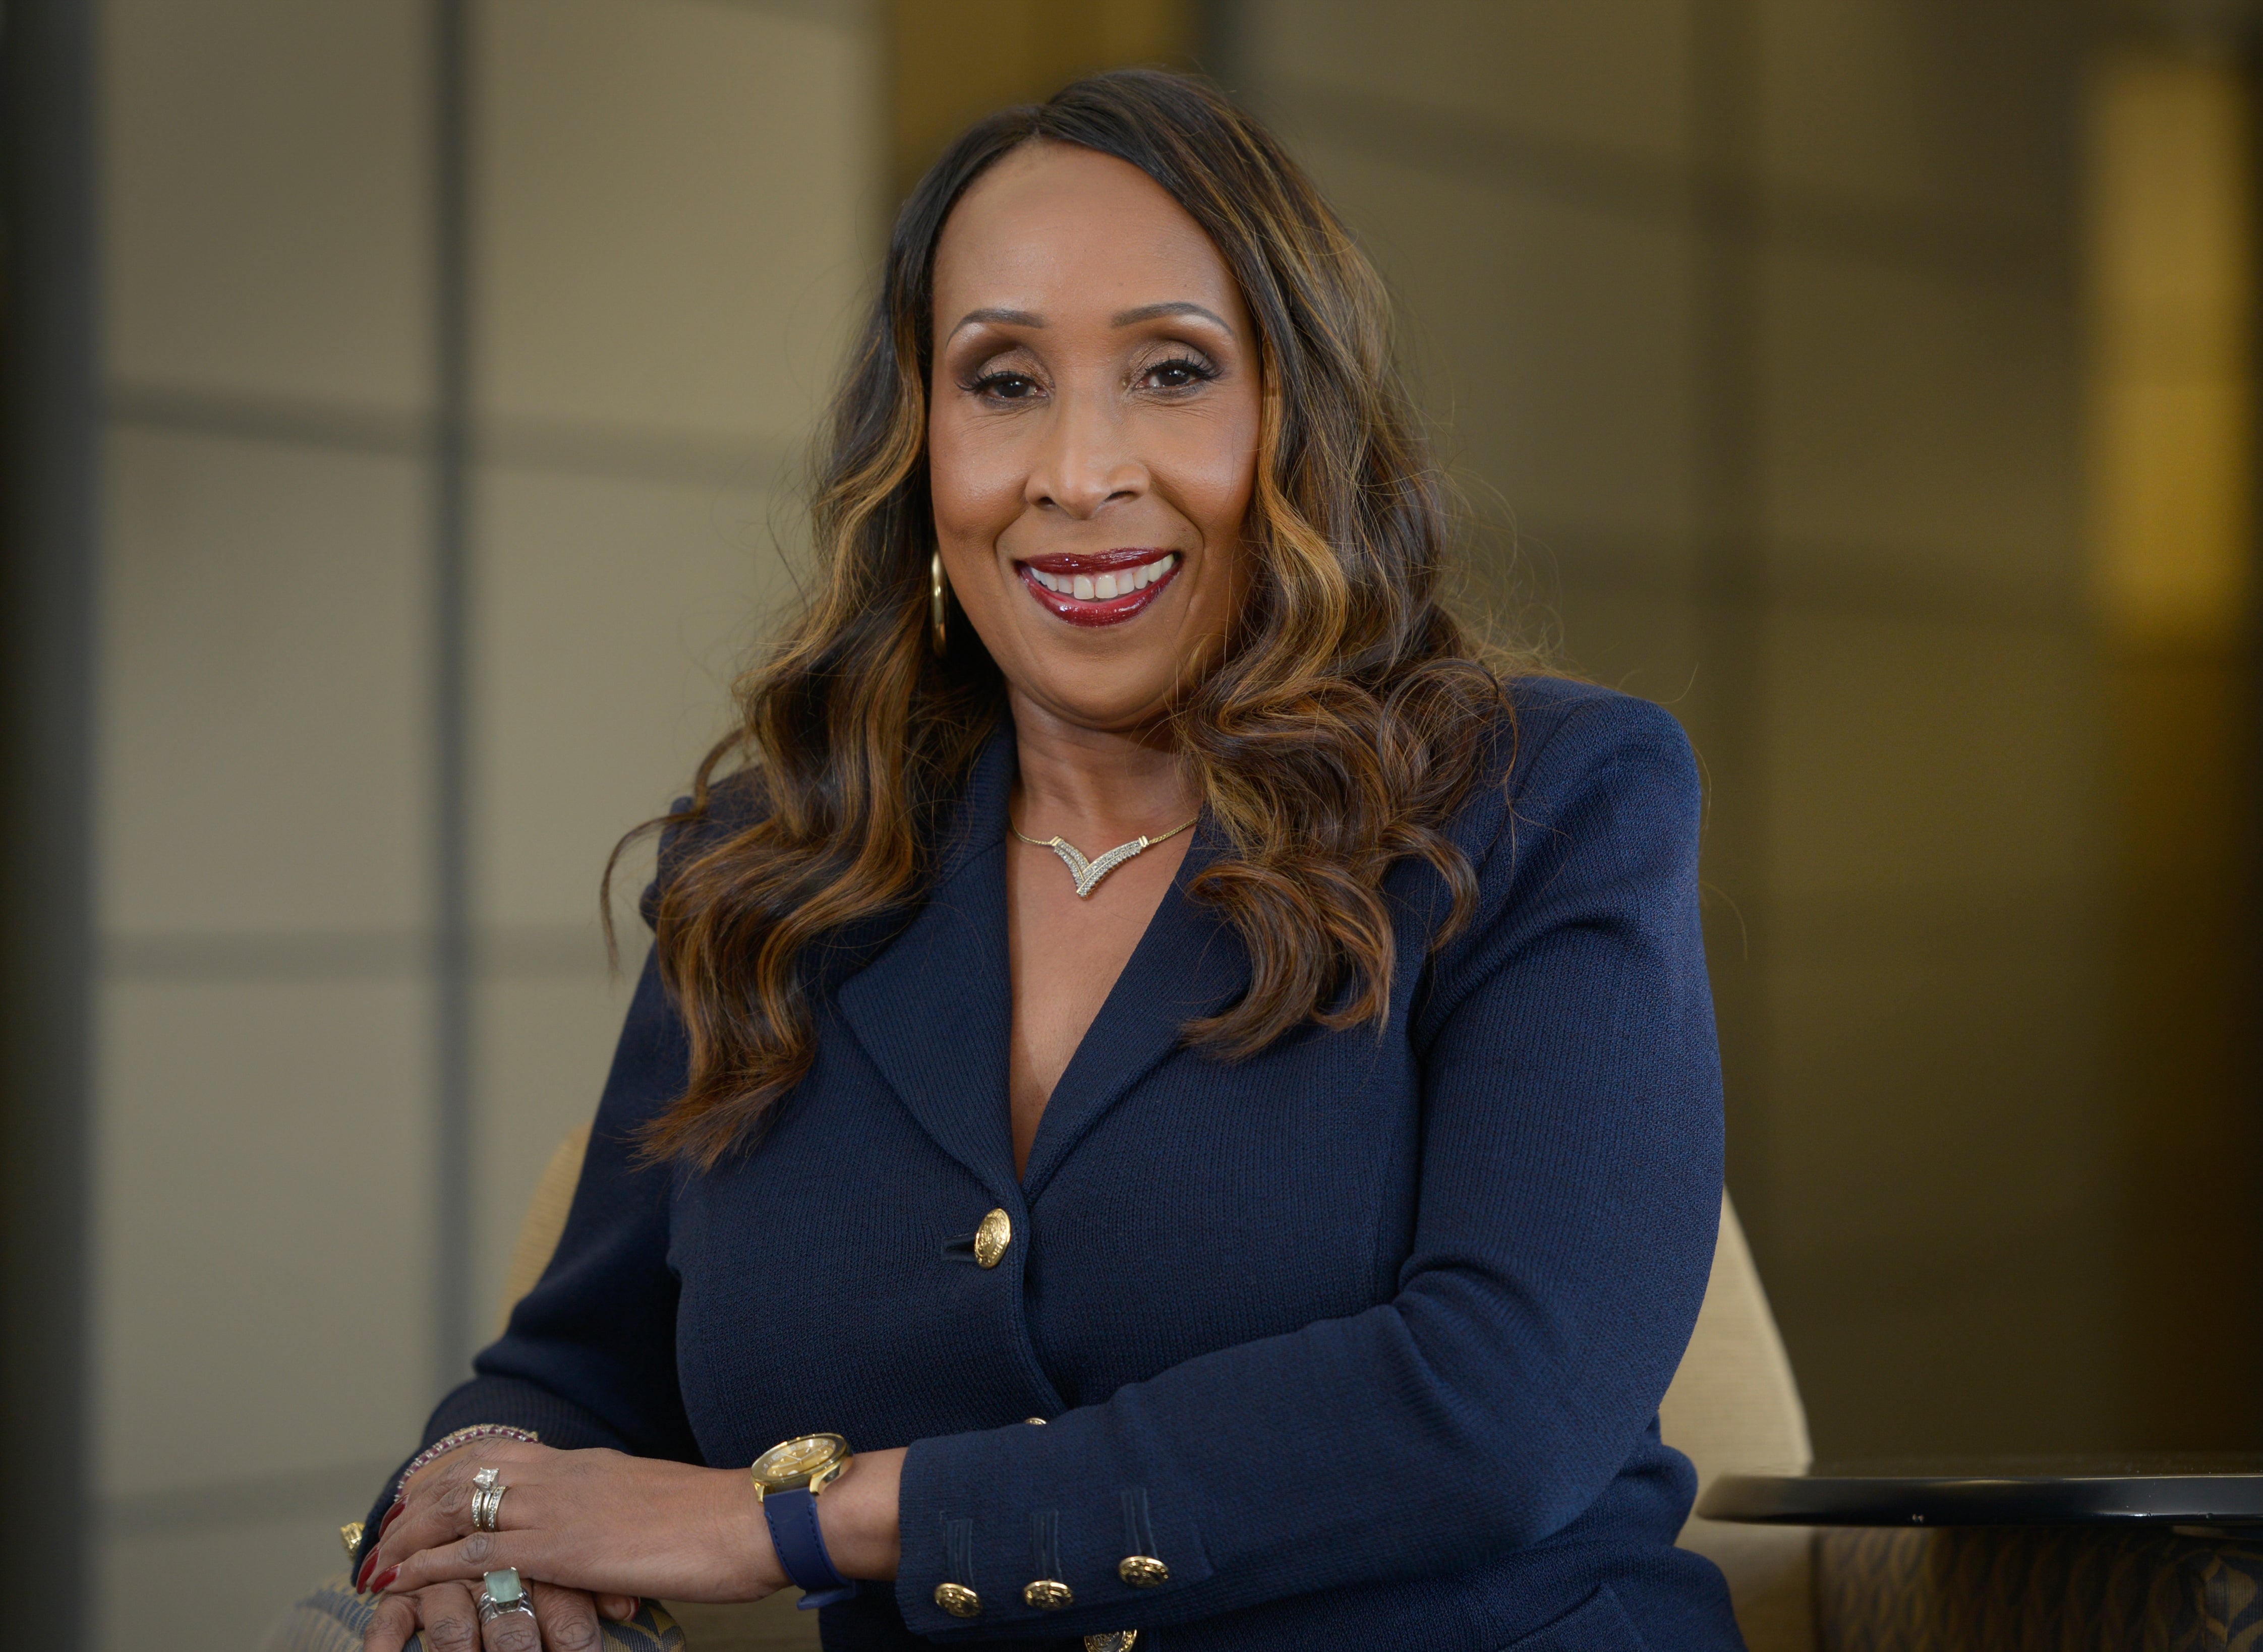 Sheila Brooks, Ph.D., Founder, President and CEO of SRB Communications